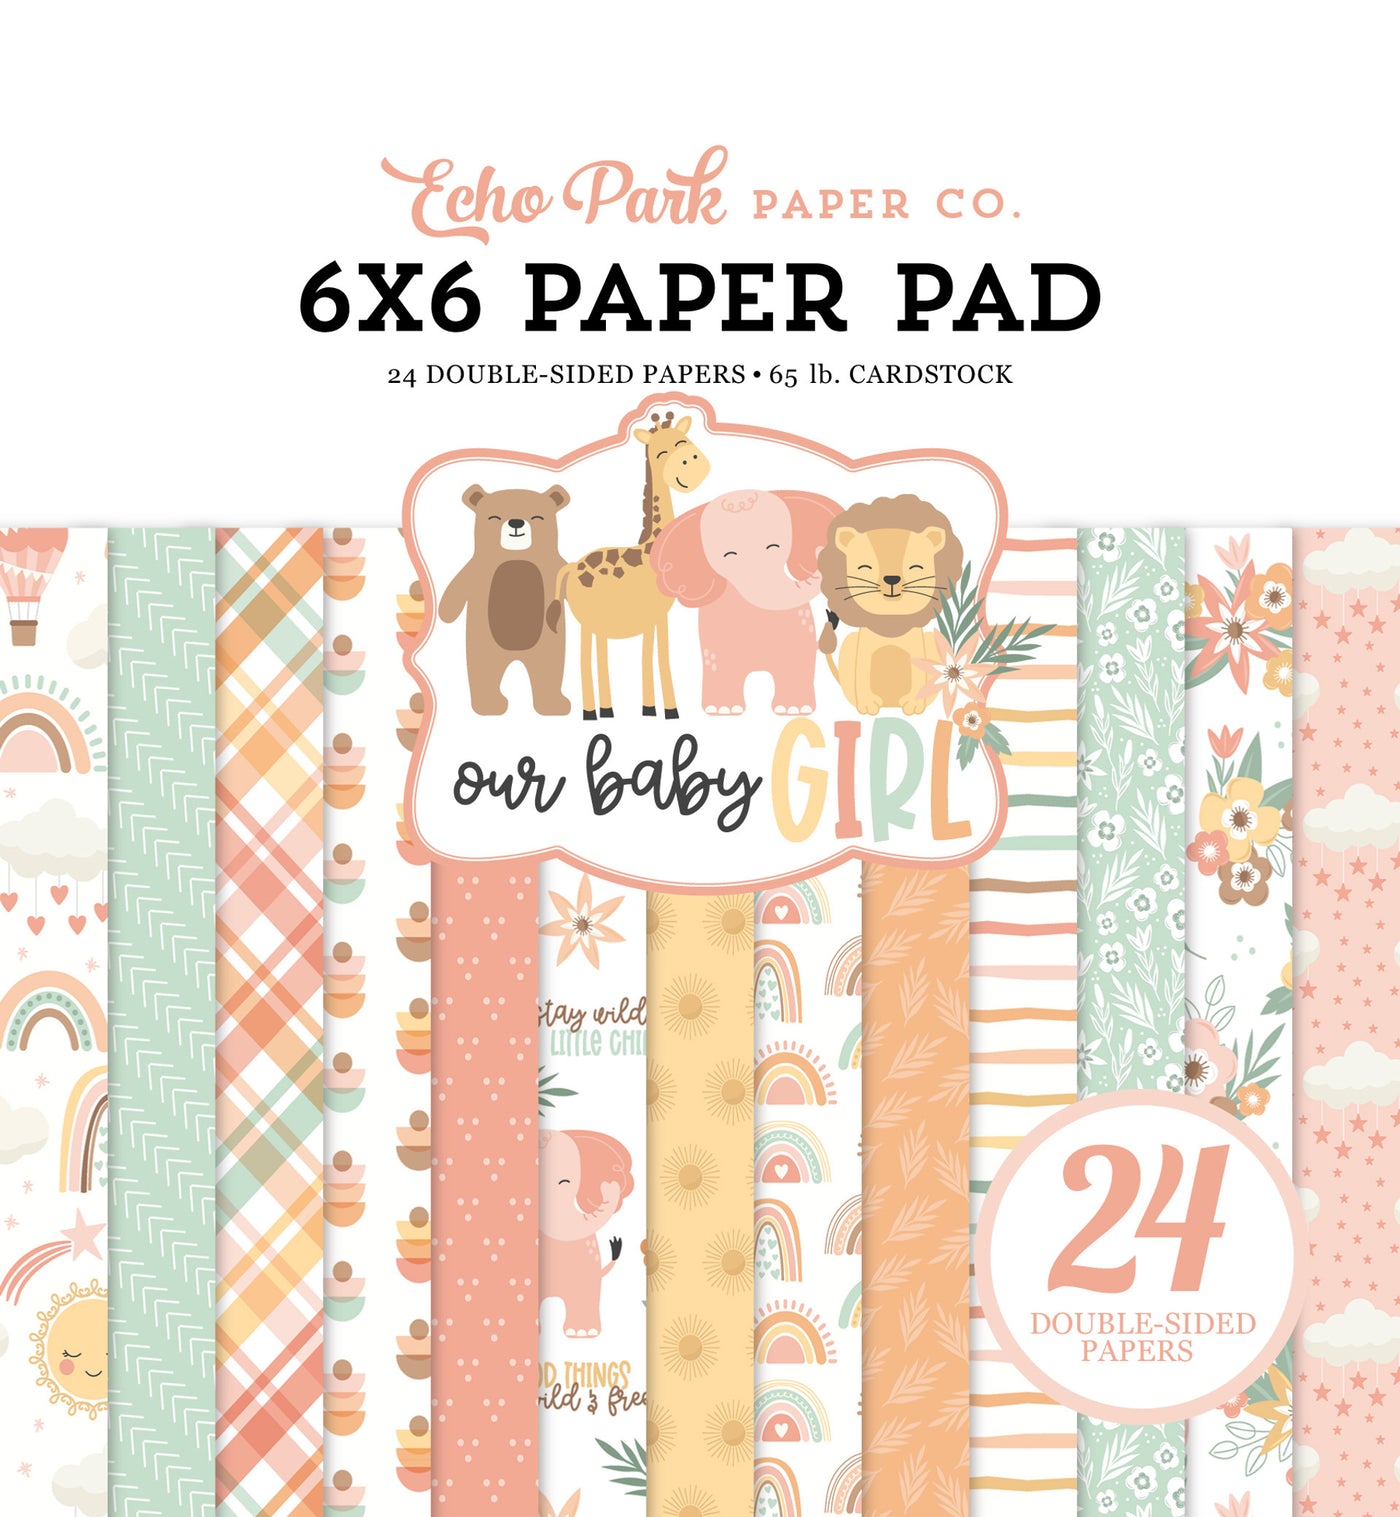 6x6 pad features cute designs and colors to celebrate the arrival of a new baby girl! Fun for cards and papercrafts. Includes 24 double-sided pages.